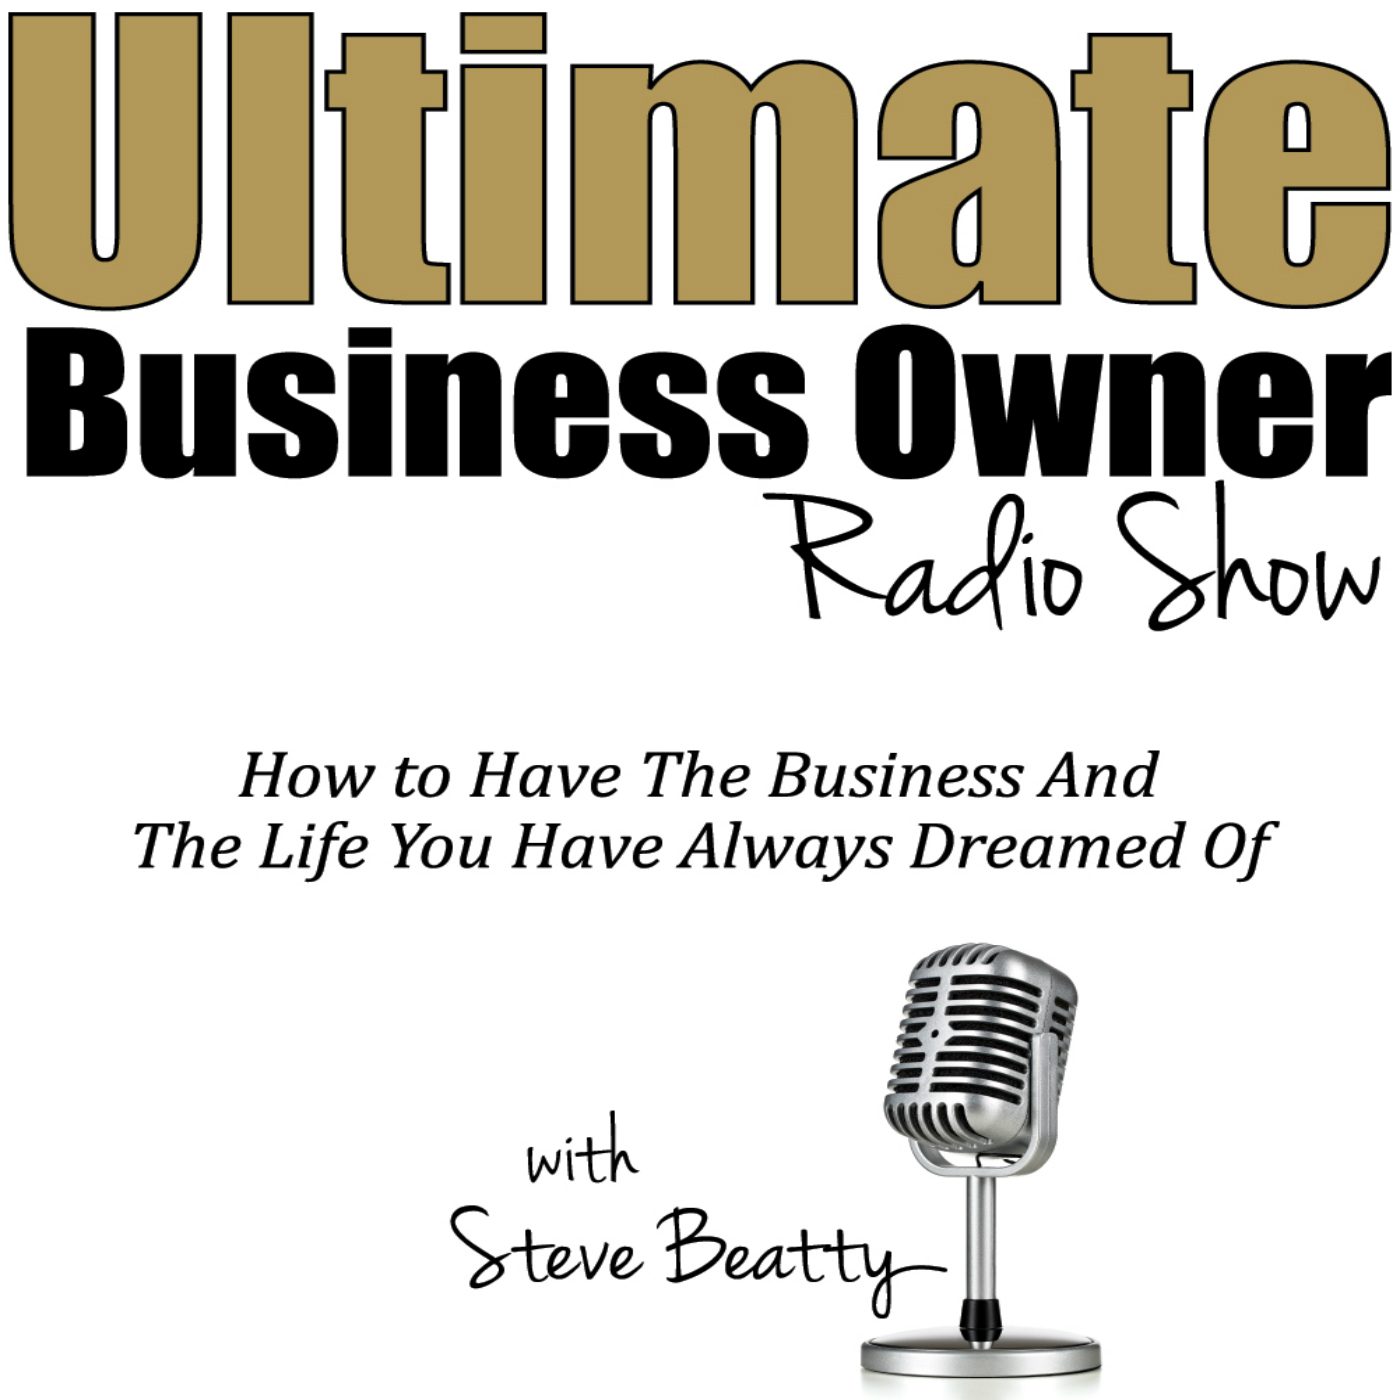 Ultimate Business Owner: Your Company's Playbook to Build Value (20m) Remy Gervais